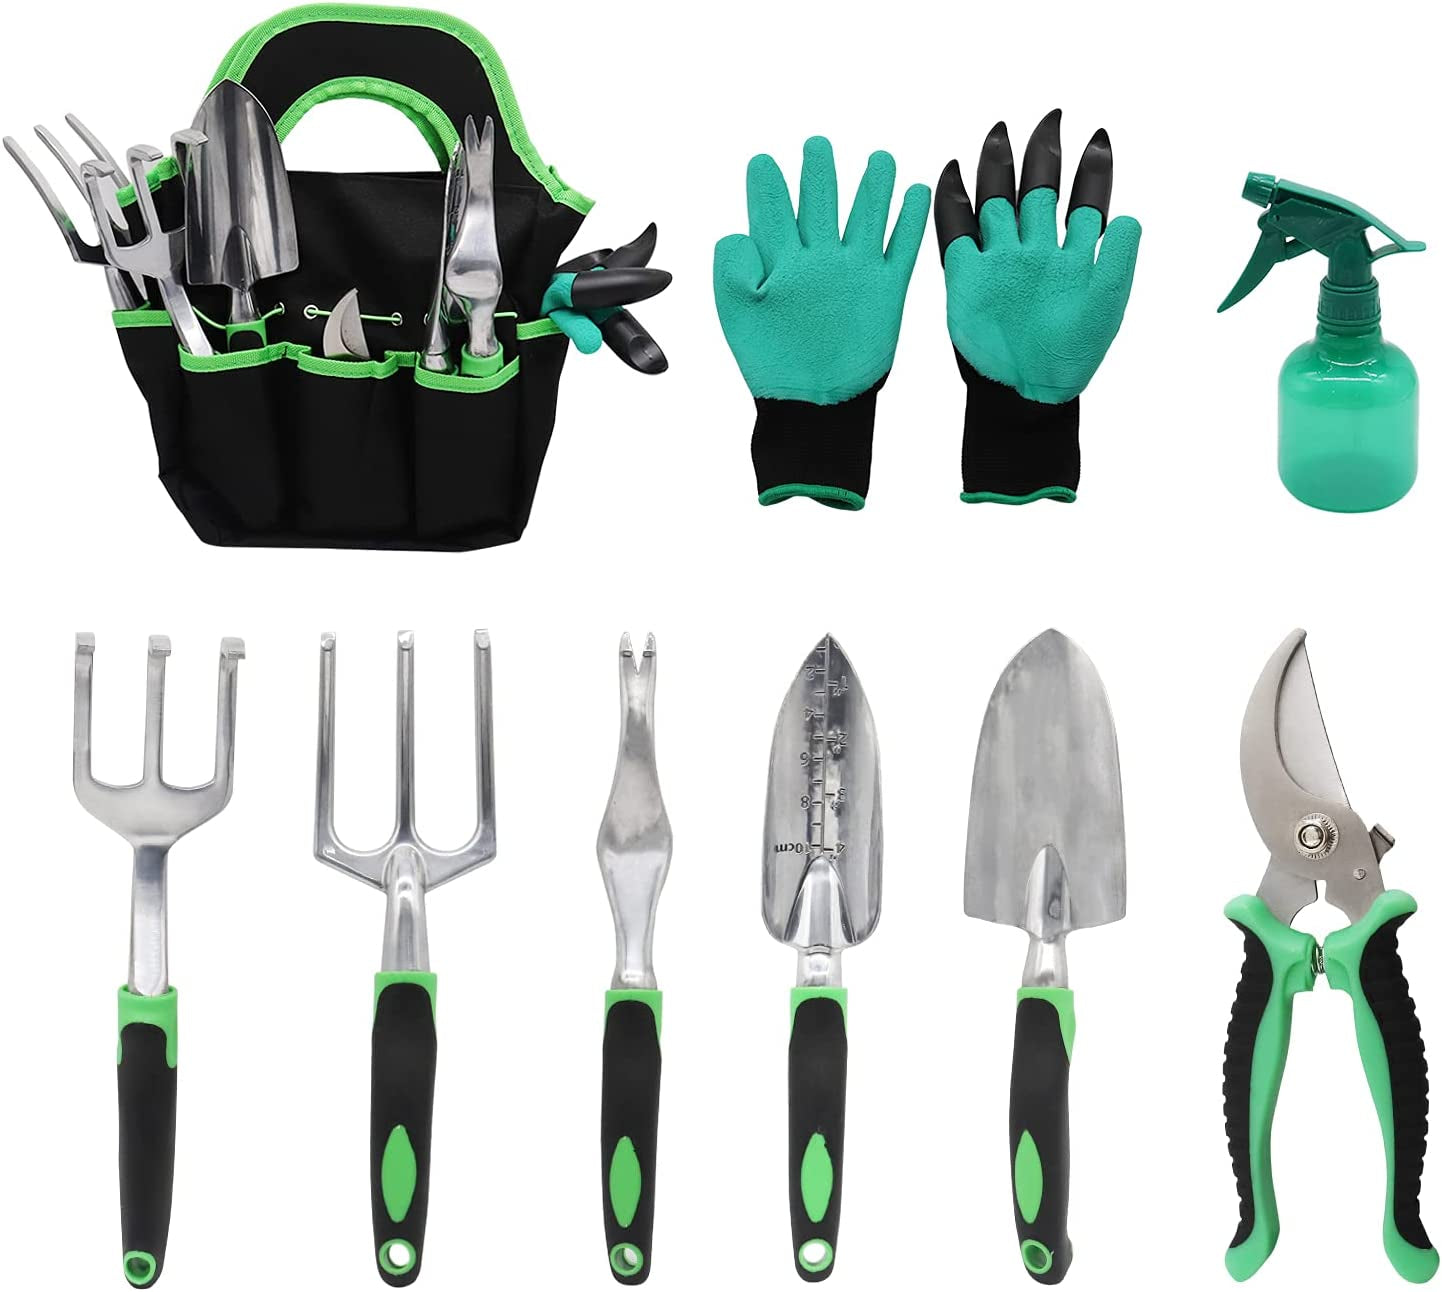 valuehall, Garden Tools Set Valuehall 9Pcs Extra Succulent Tools Set Heavy Duty Gardening Tools Set with Stainless Steel Shovel Rake Fork Shear Gloves and Storage Tote Bag for Men Women Gardeners V7H03